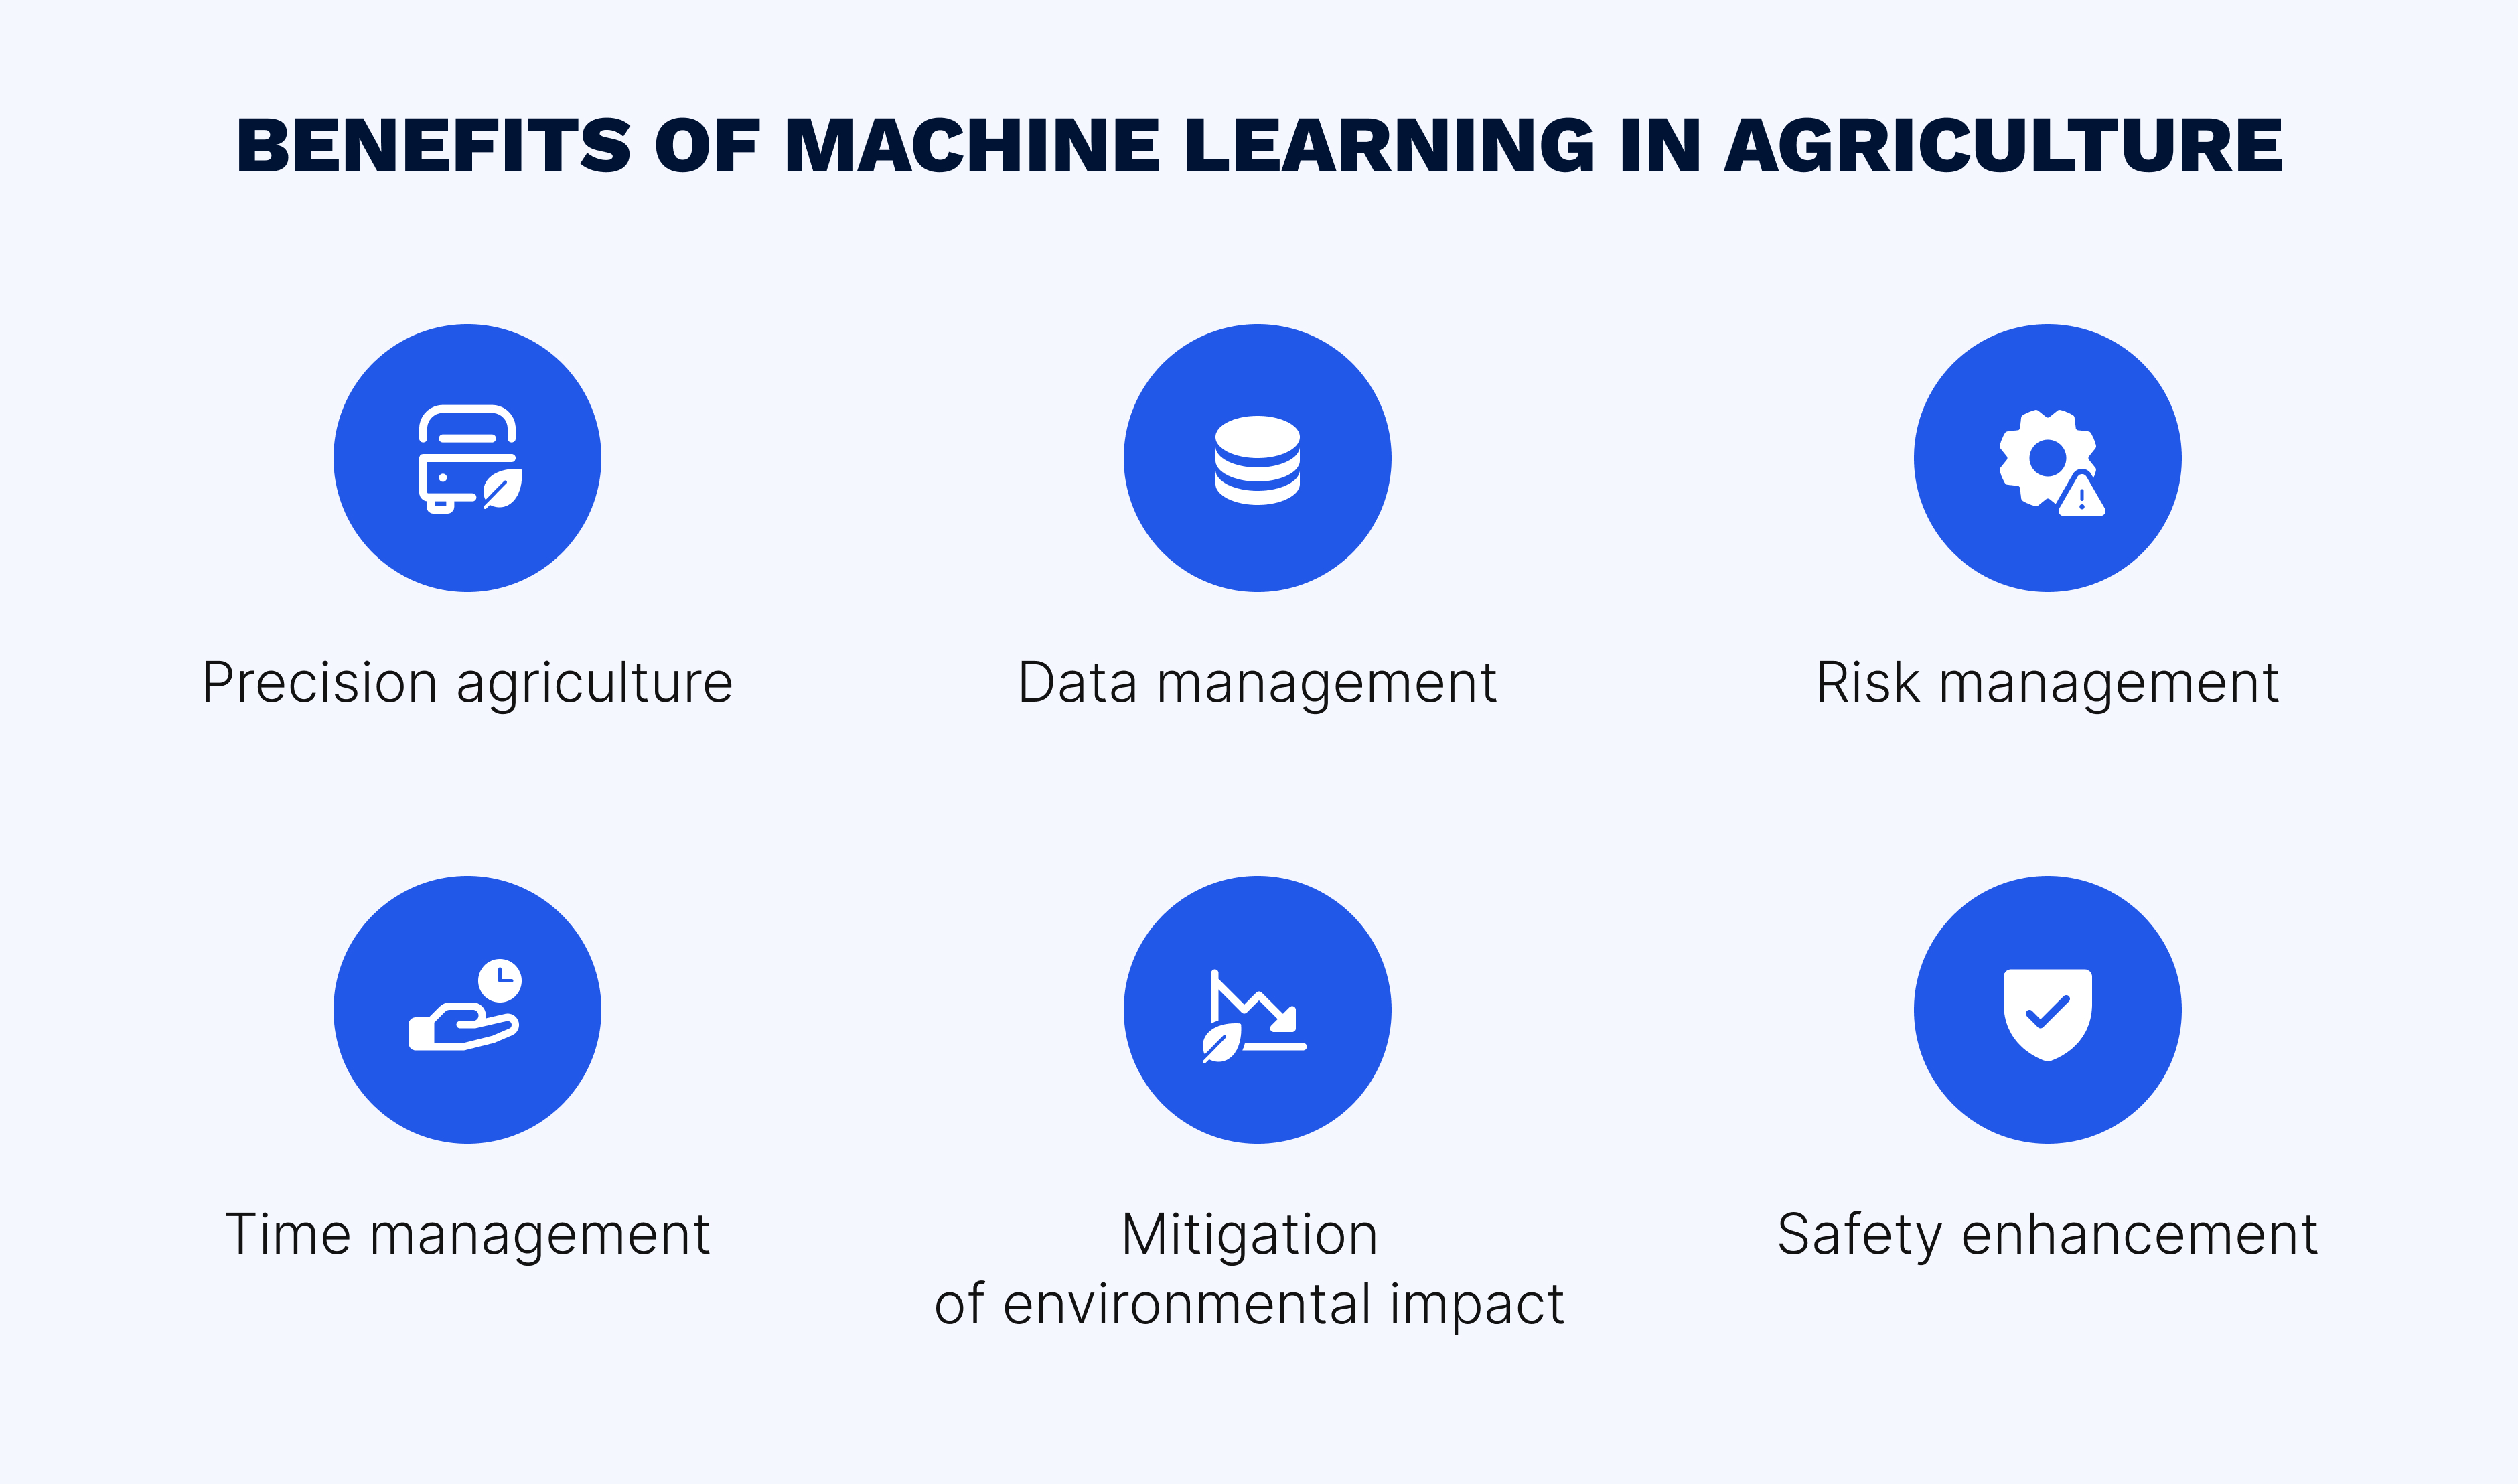 Advantages of using machine learning in farming